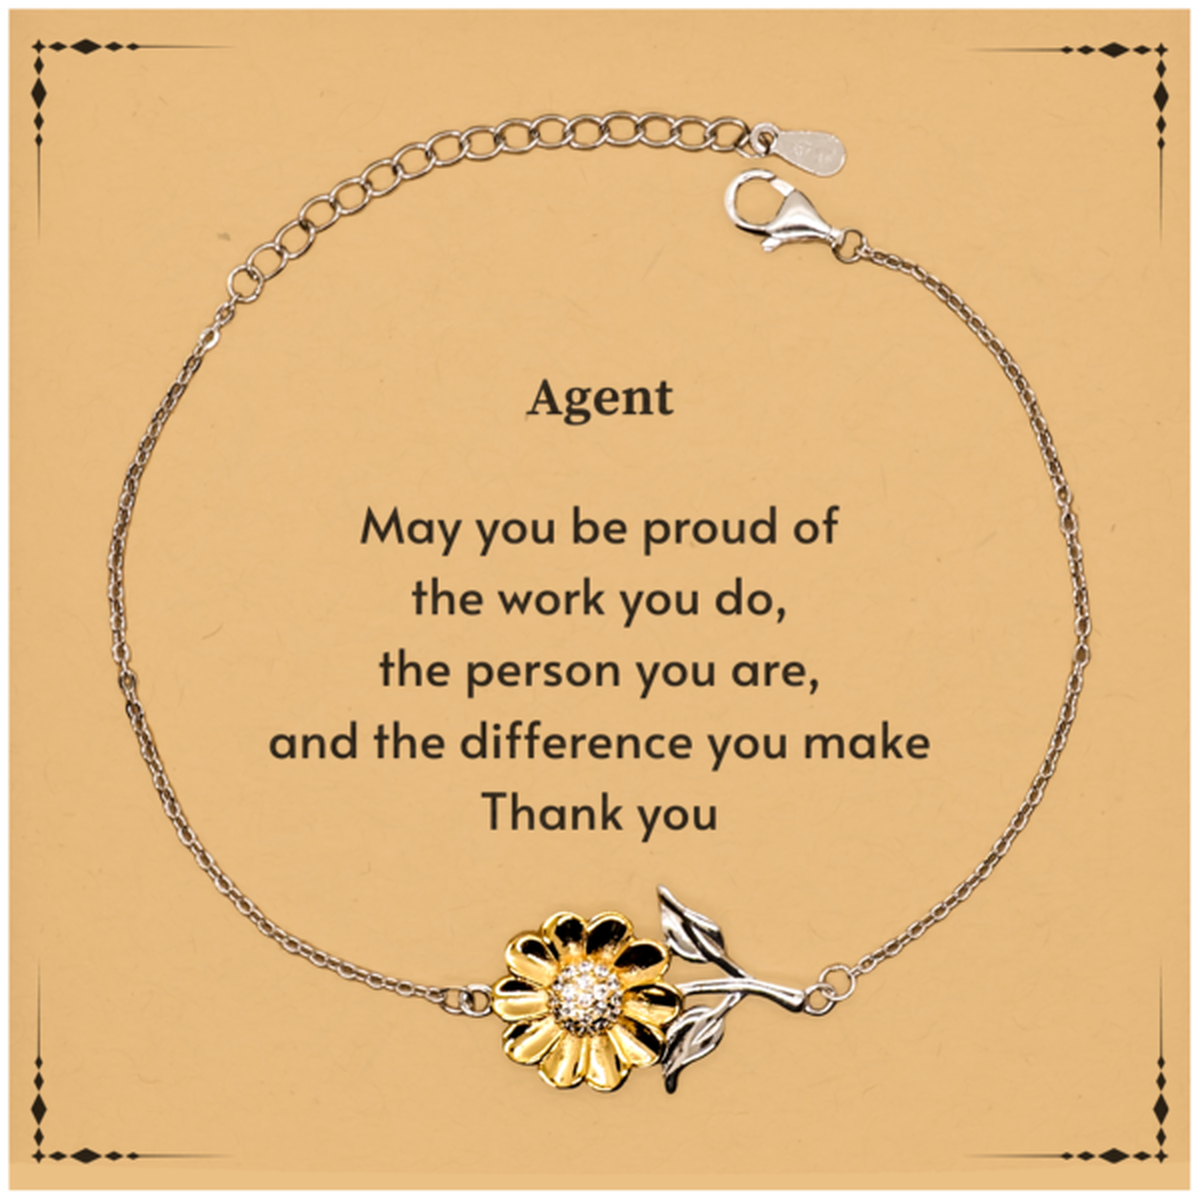 Heartwarming Sunflower Bracelet Retirement Coworkers Gifts for Agent, Agent May You be proud of the work you do, the person you are Gifts for Boss Men Women Friends